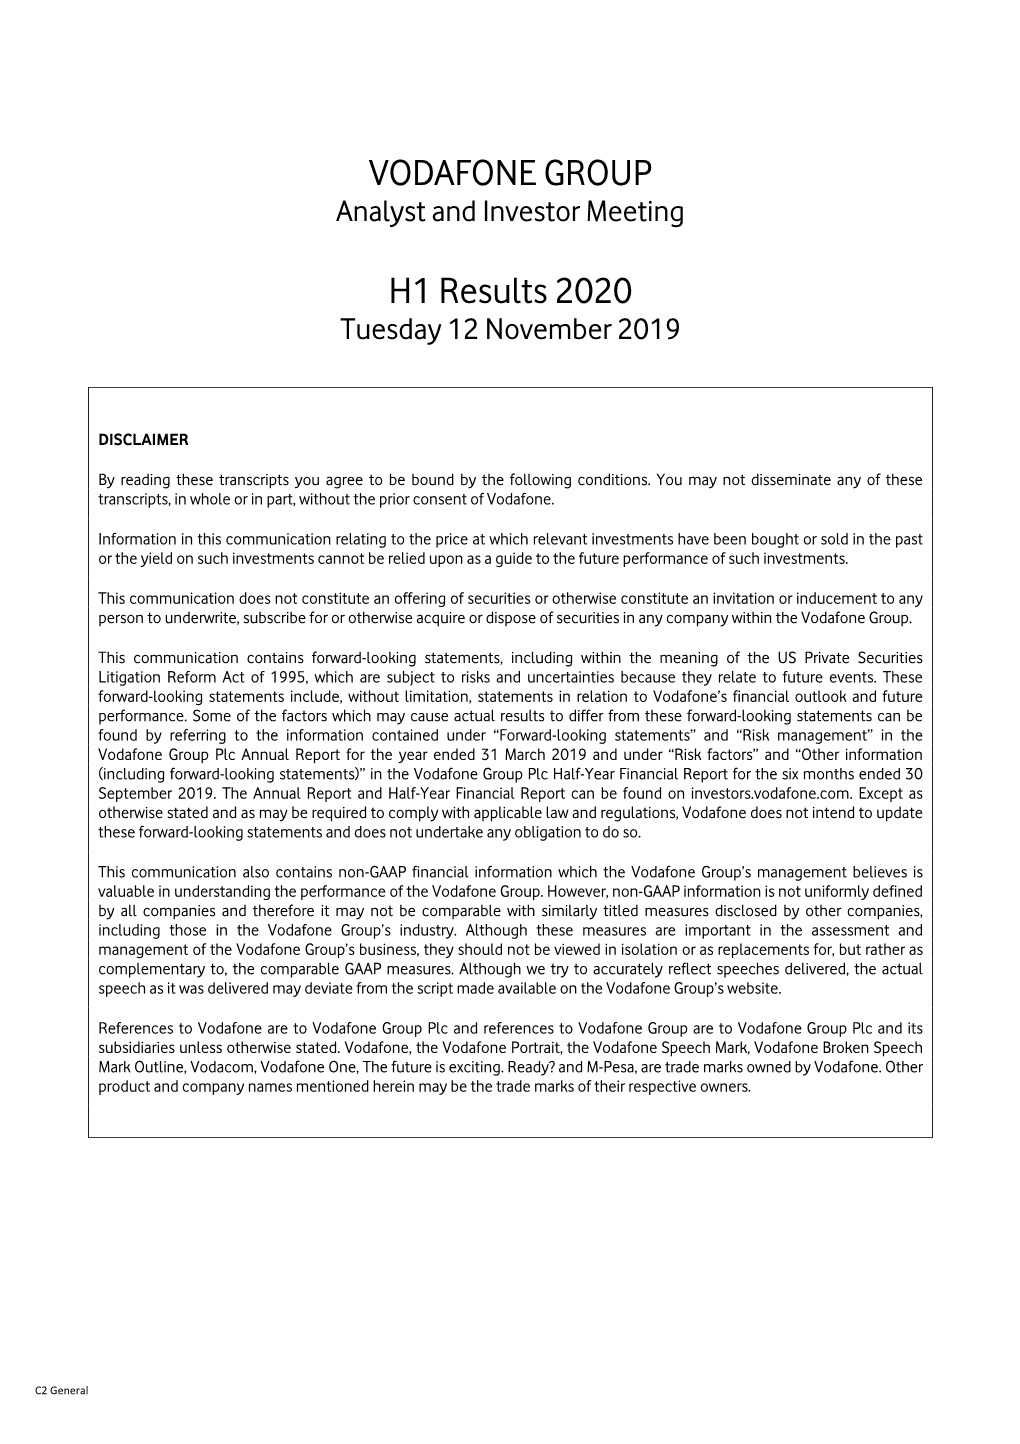 VODAFONE GROUP H1 Results 2020